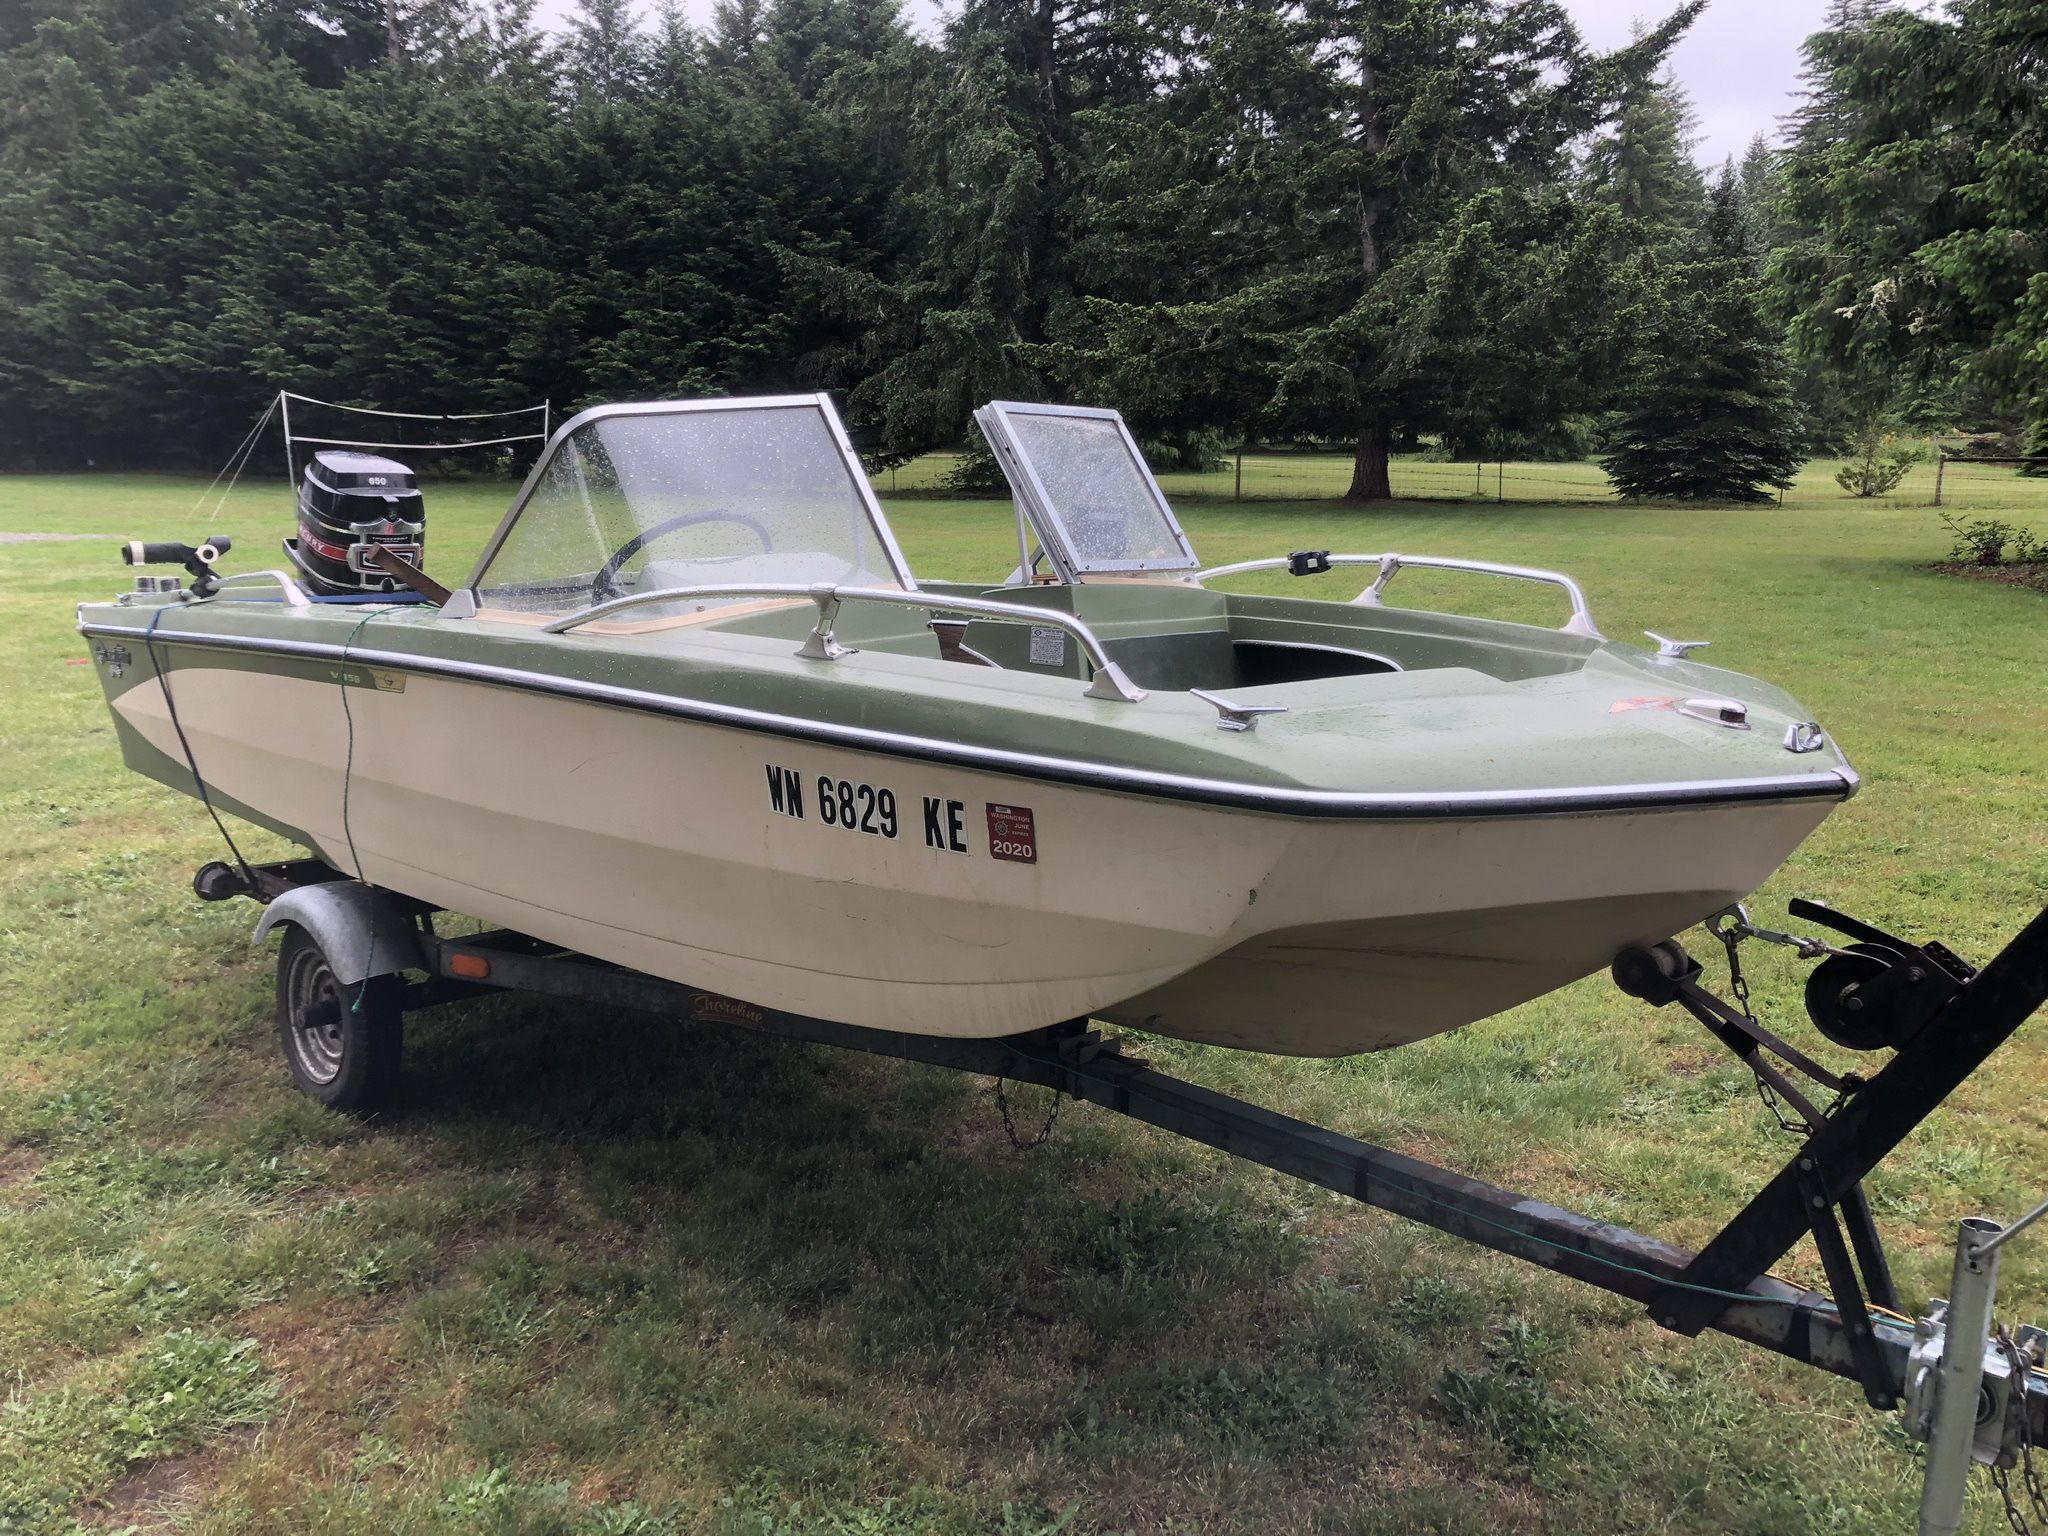 14' 1970 Glastron boat for Sale in Bonney Lake, WA - OfferUp